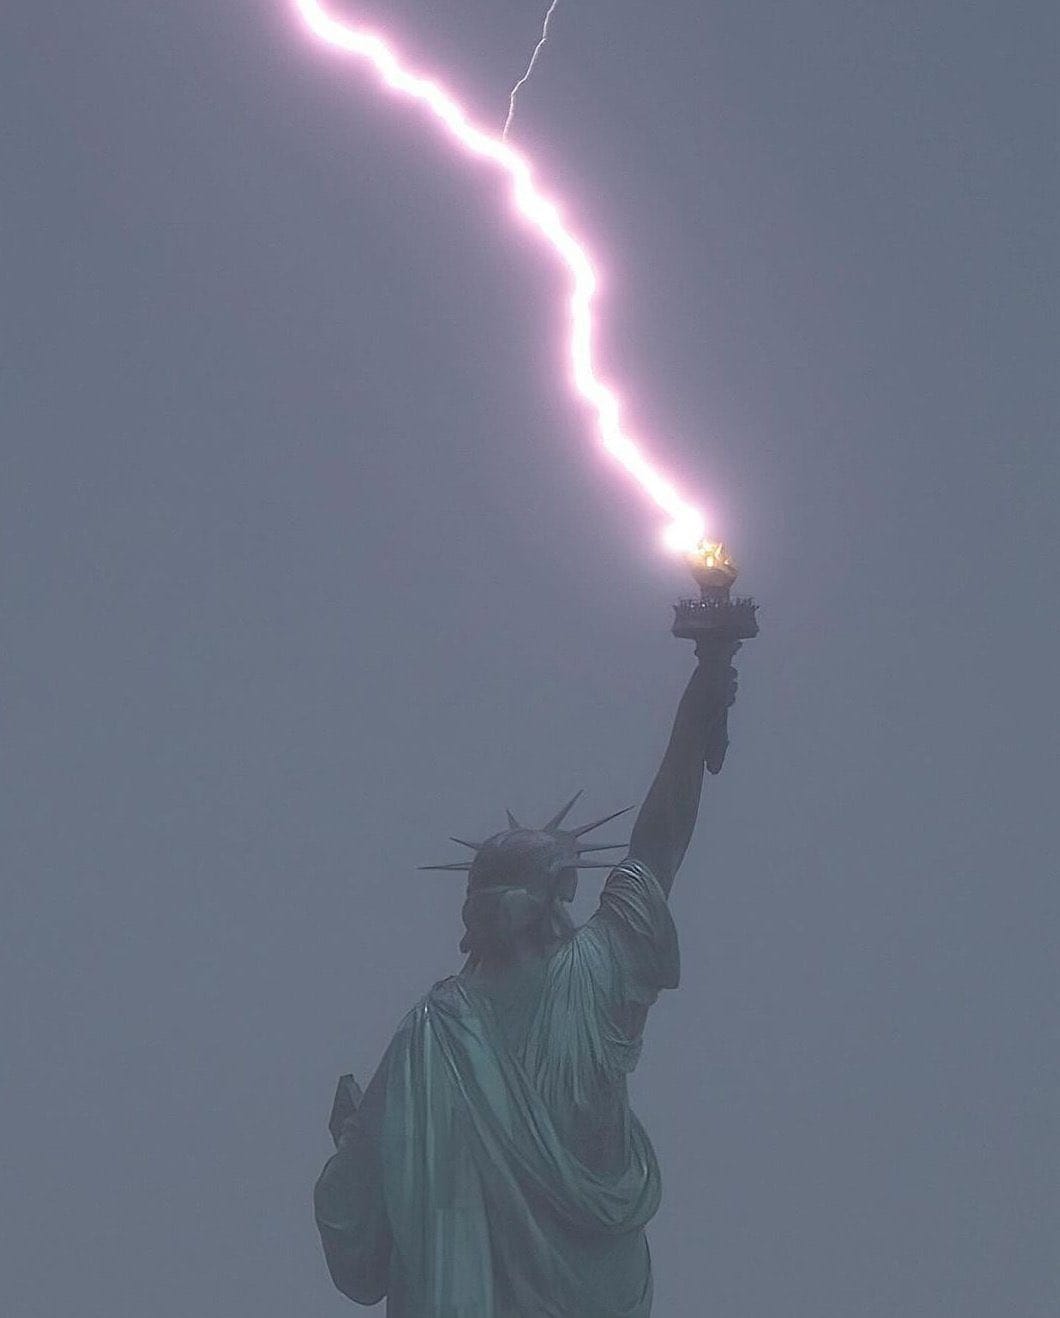 Statue of Liberty Struck by Lightning: A Mesmerizing Moment Captured